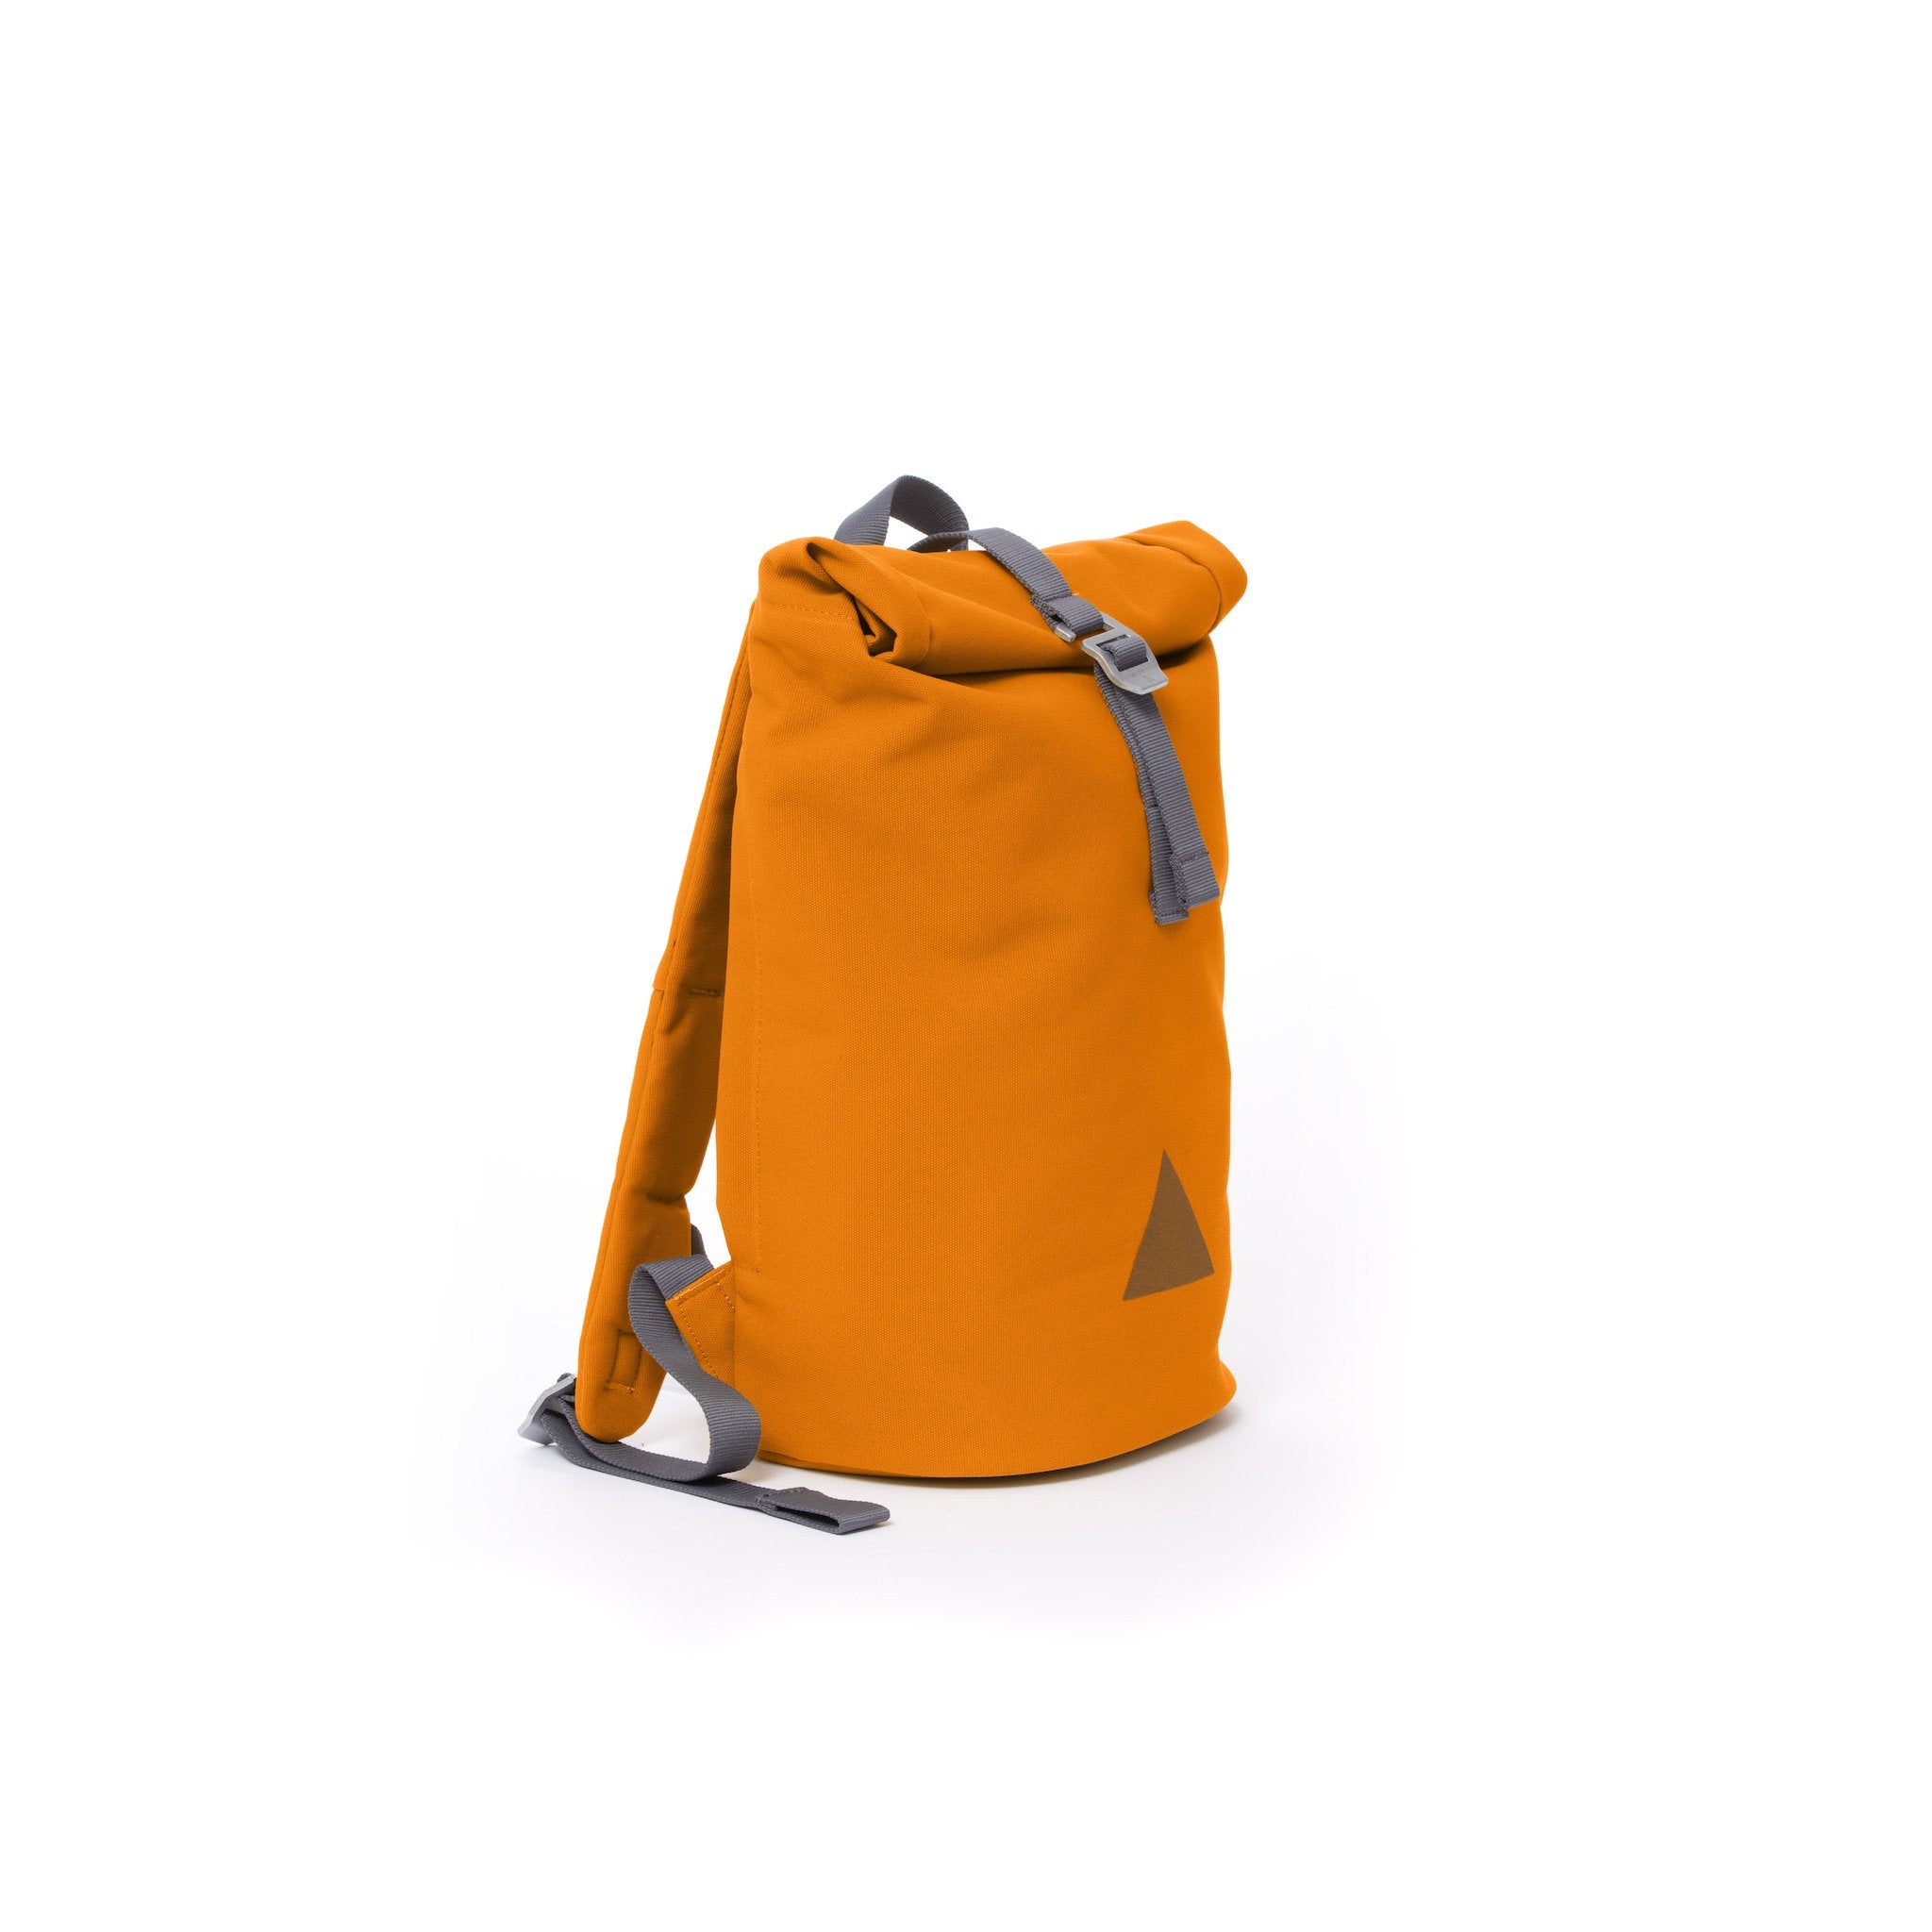 Orange recycled canvas women’s rolltop backpack.